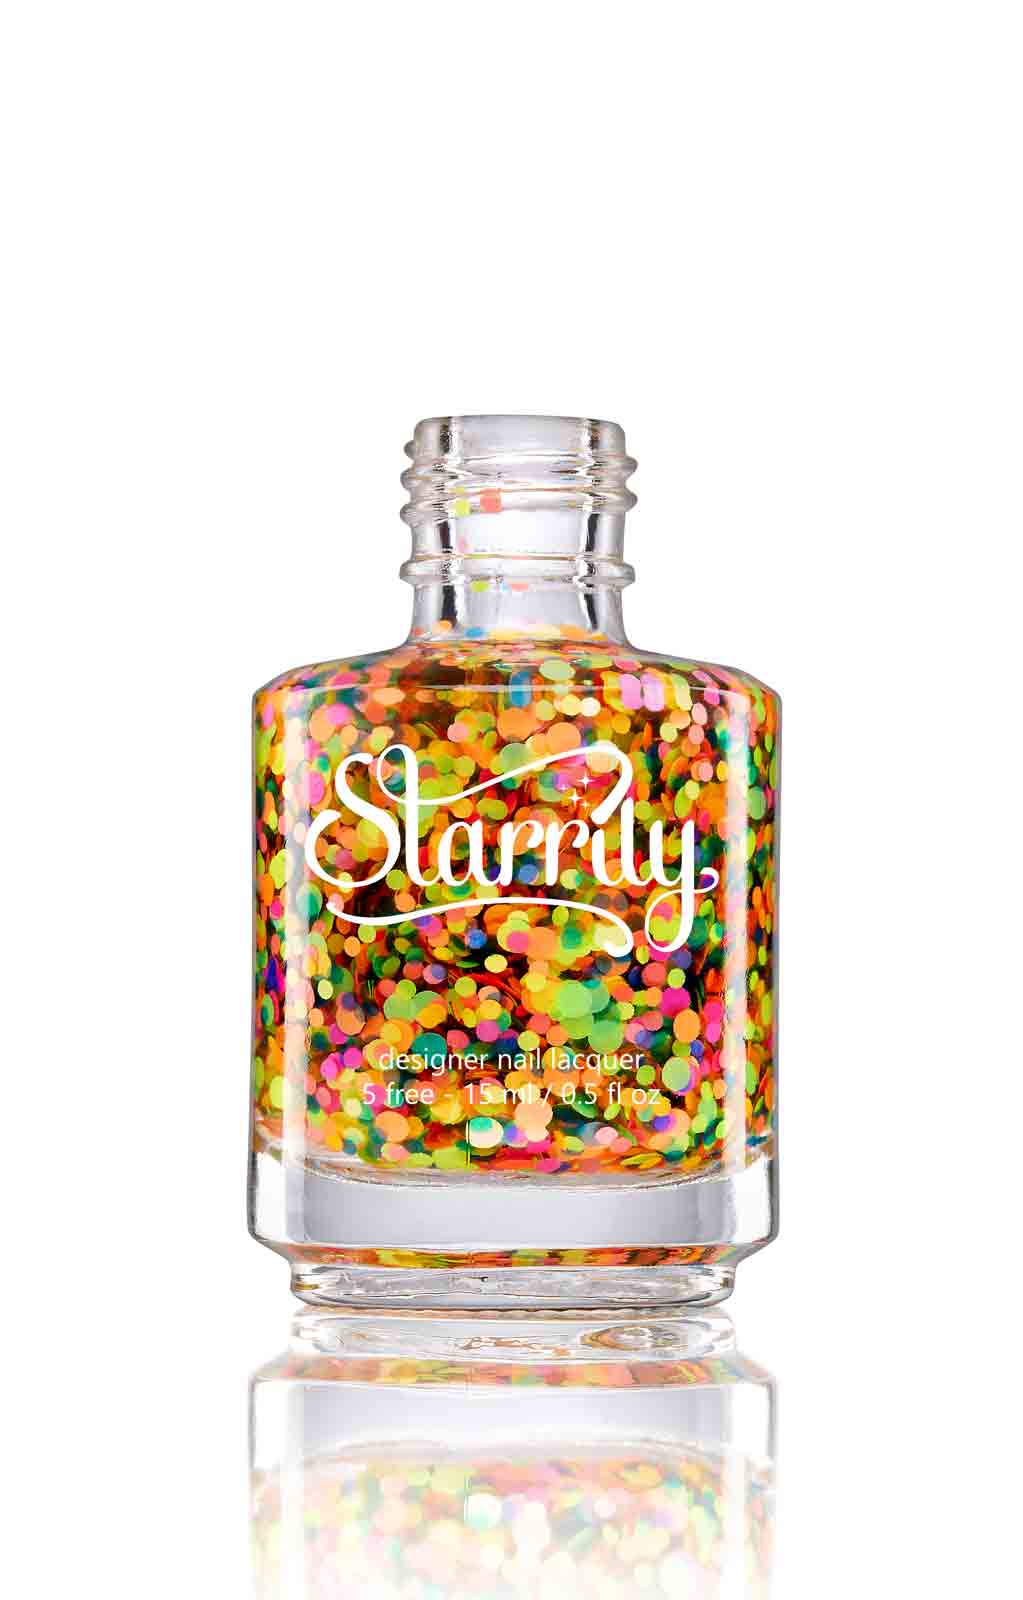 Gumballs has colorful bright neon glitter in a clear base